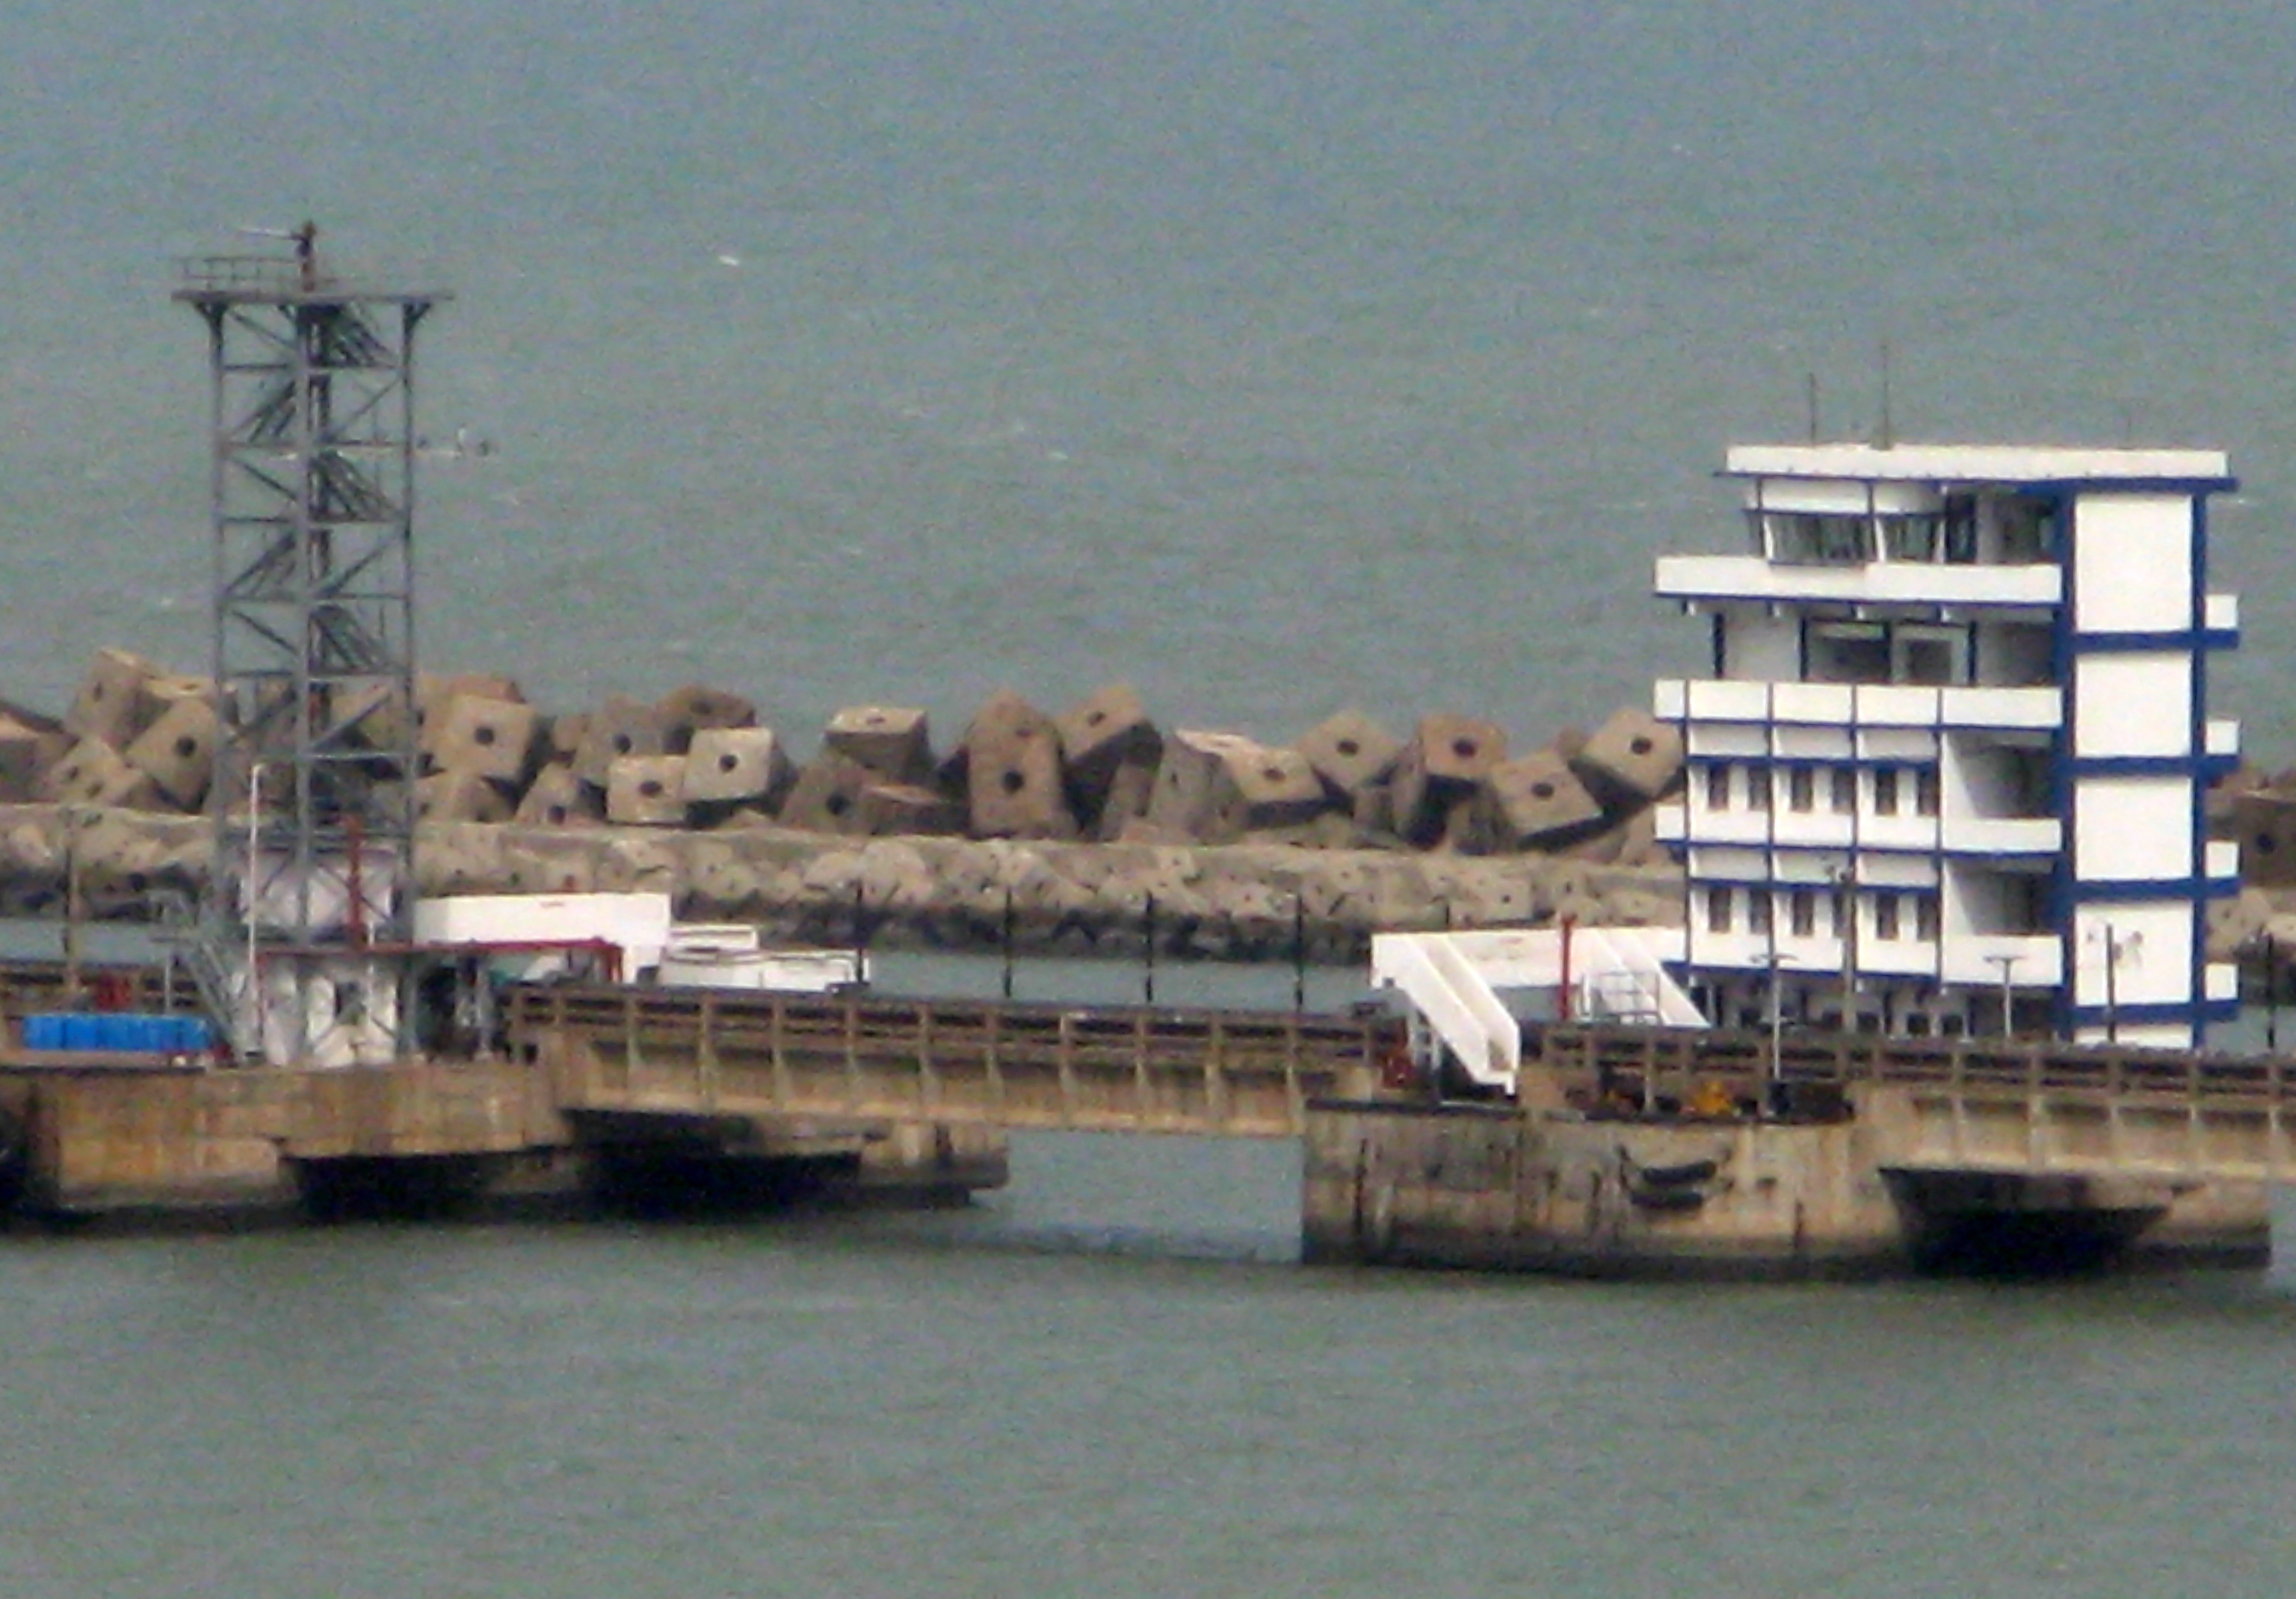 File:Barriers at Vizag seaport.JPG - Wikimedia Commons